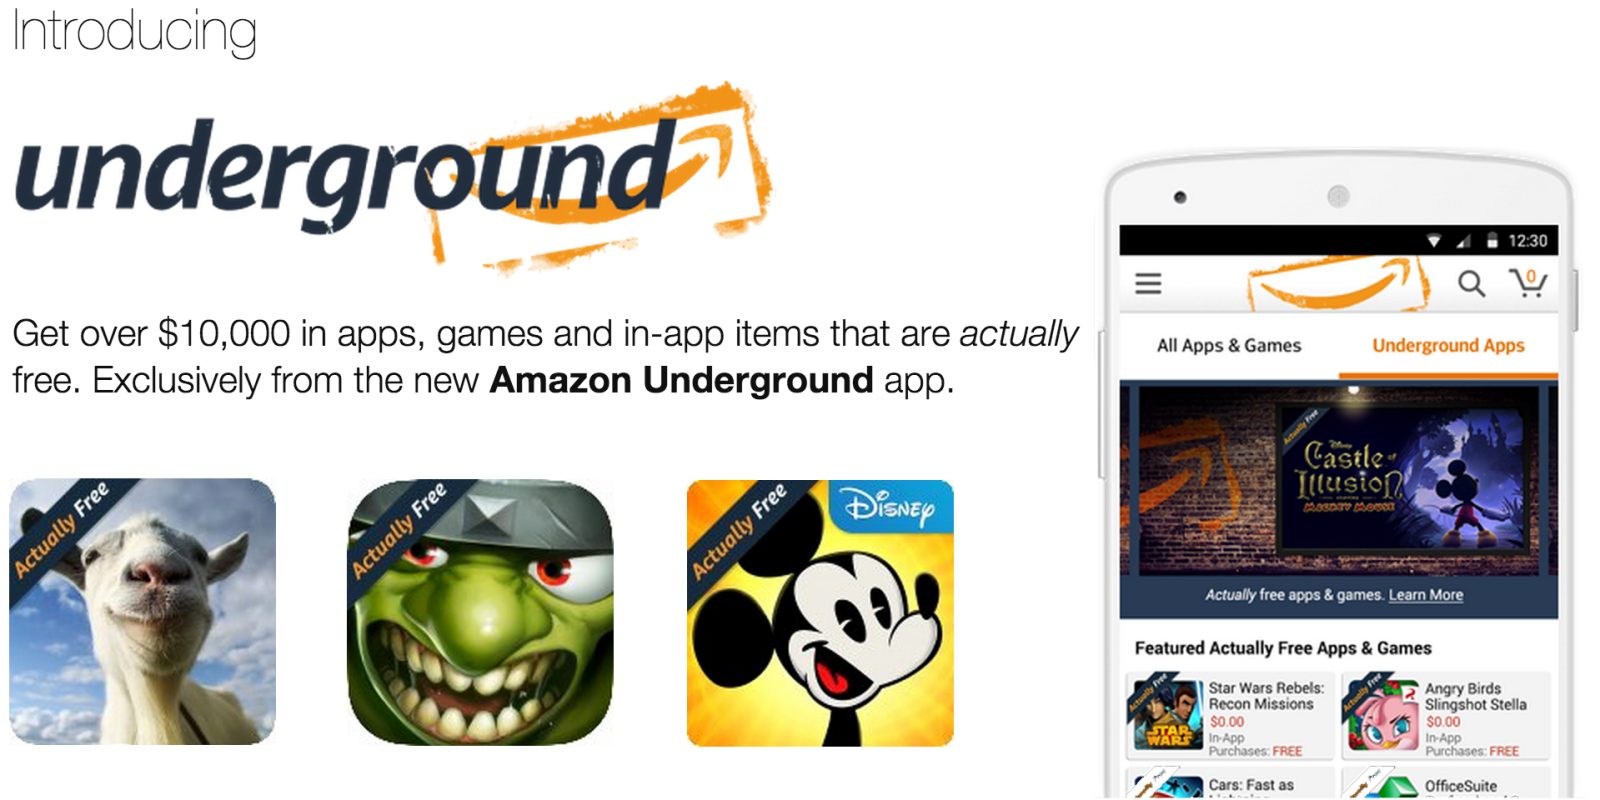 Underground offers $10,000 worth of free Android apps - Computerworld